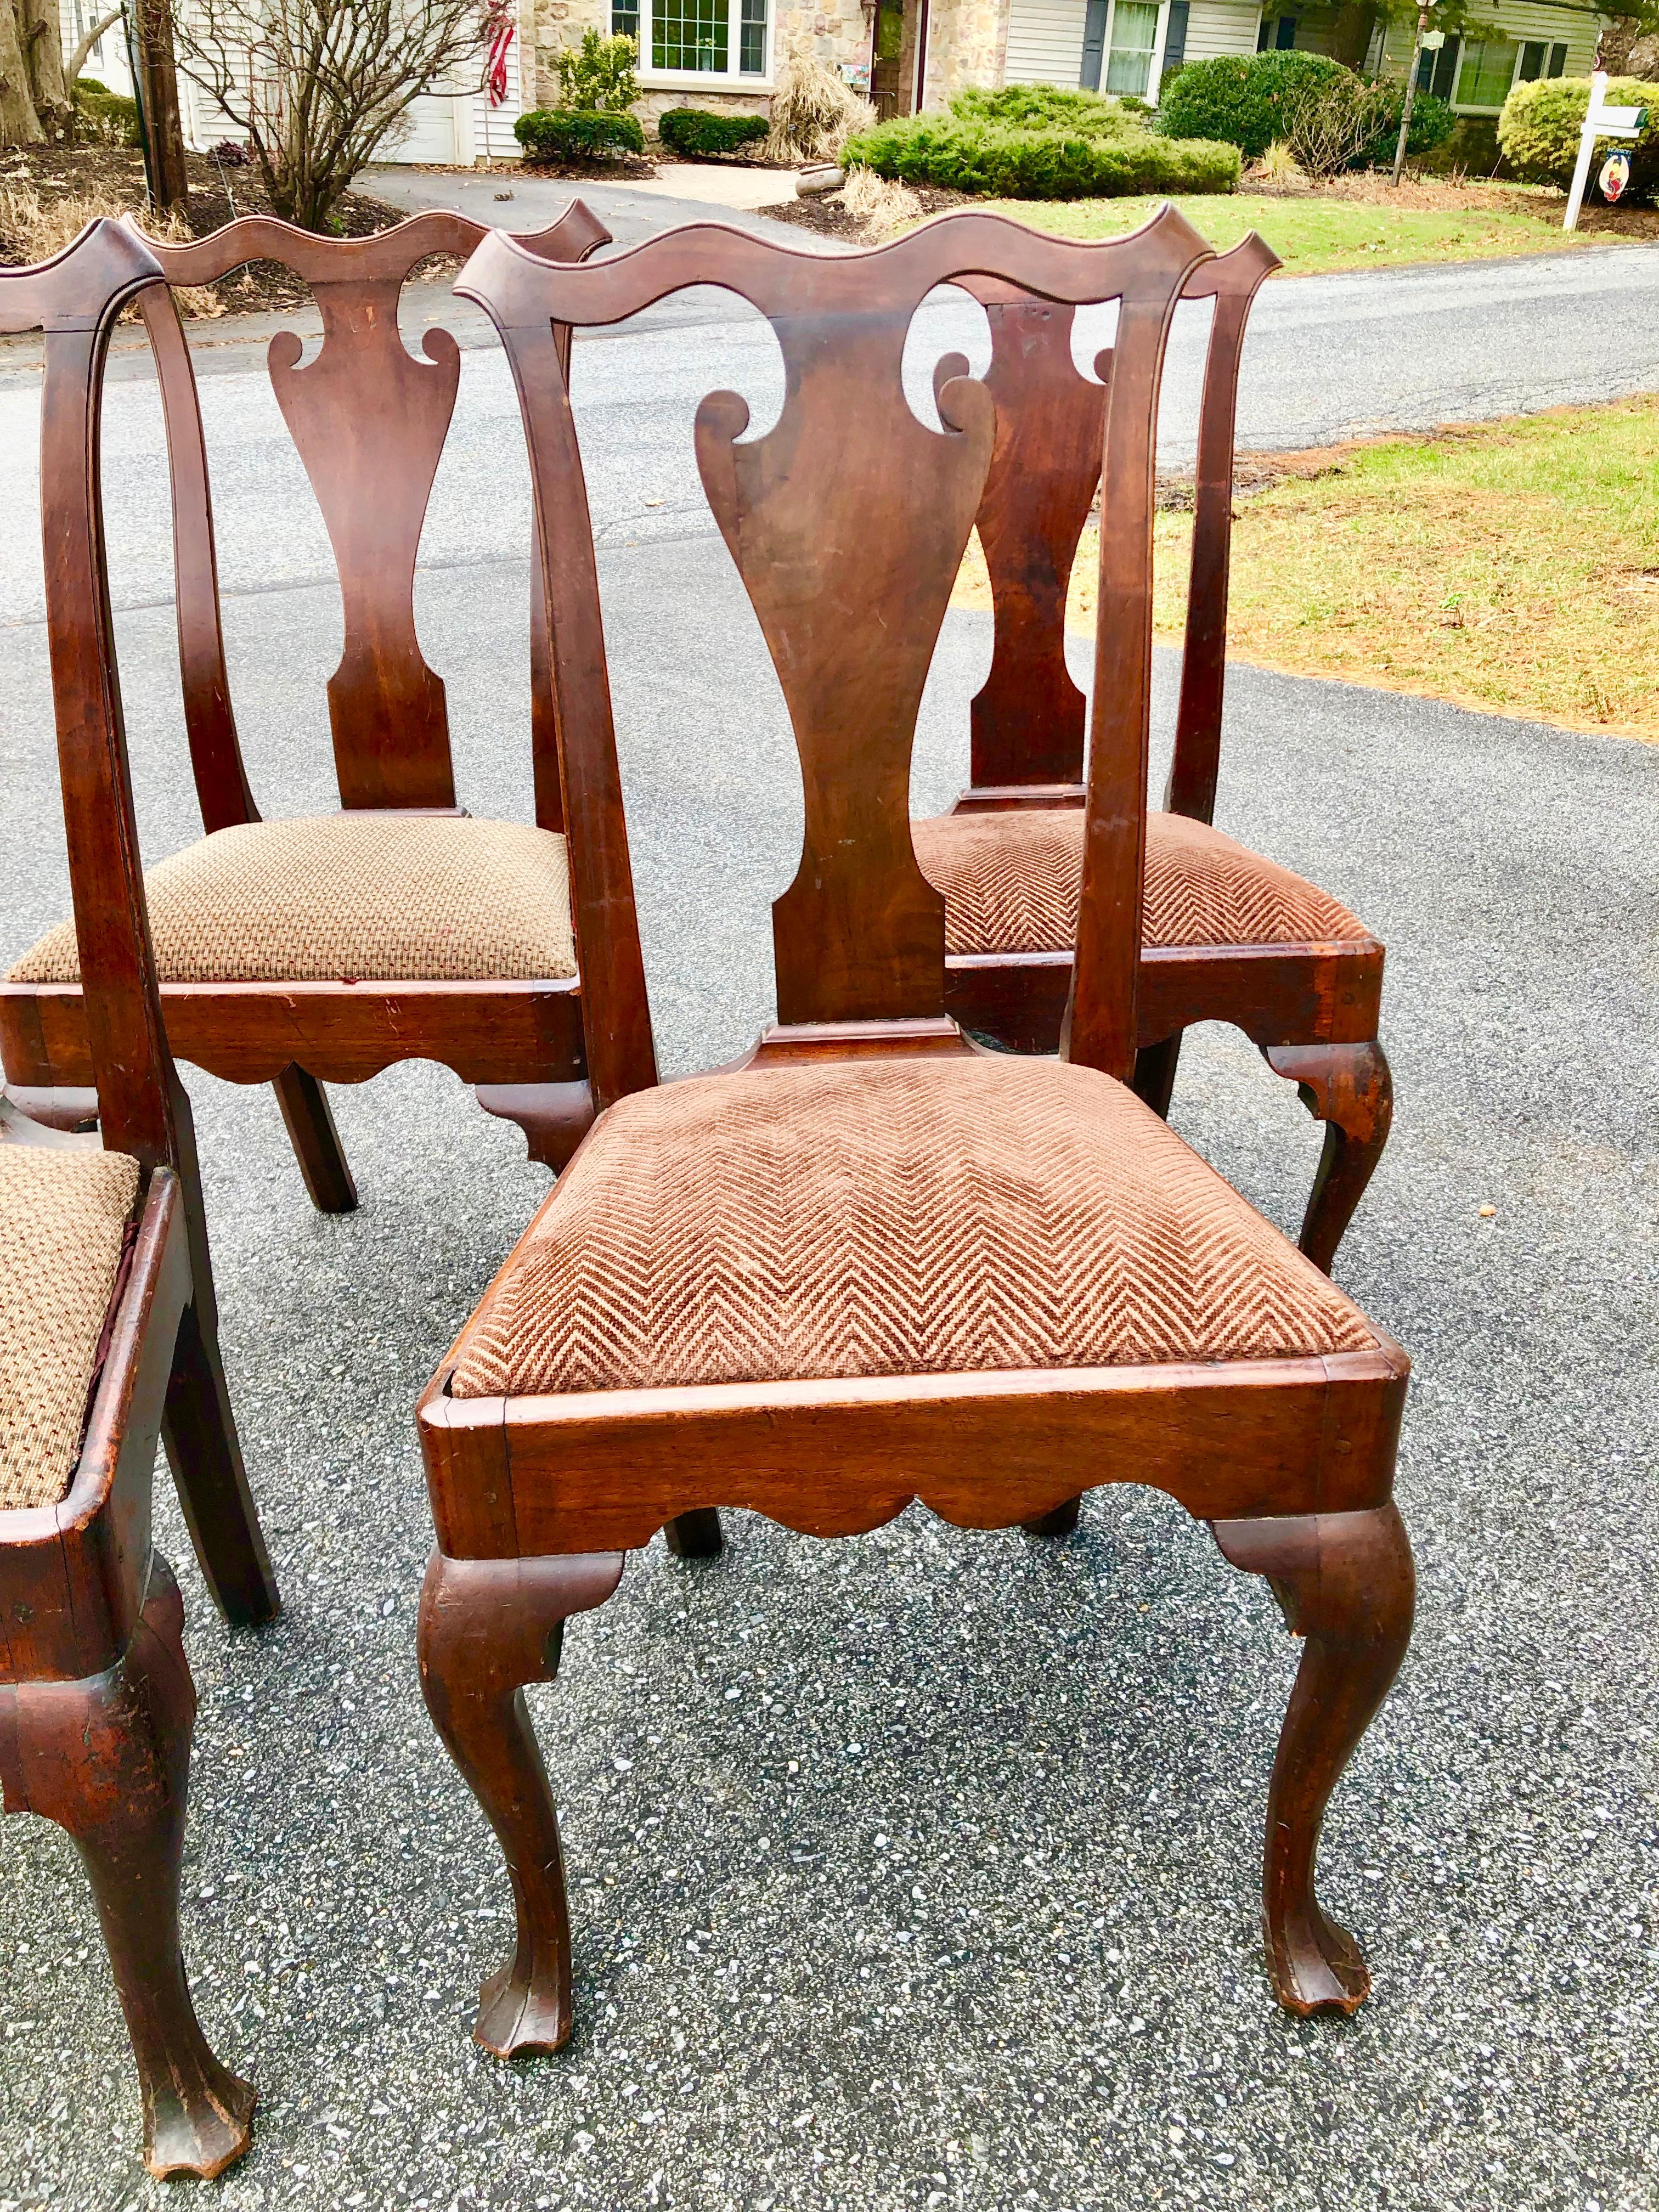 Brushed Philadelphia Queen Ann Chairs Walnut 18th Century Savery Type Set of Four For Sale